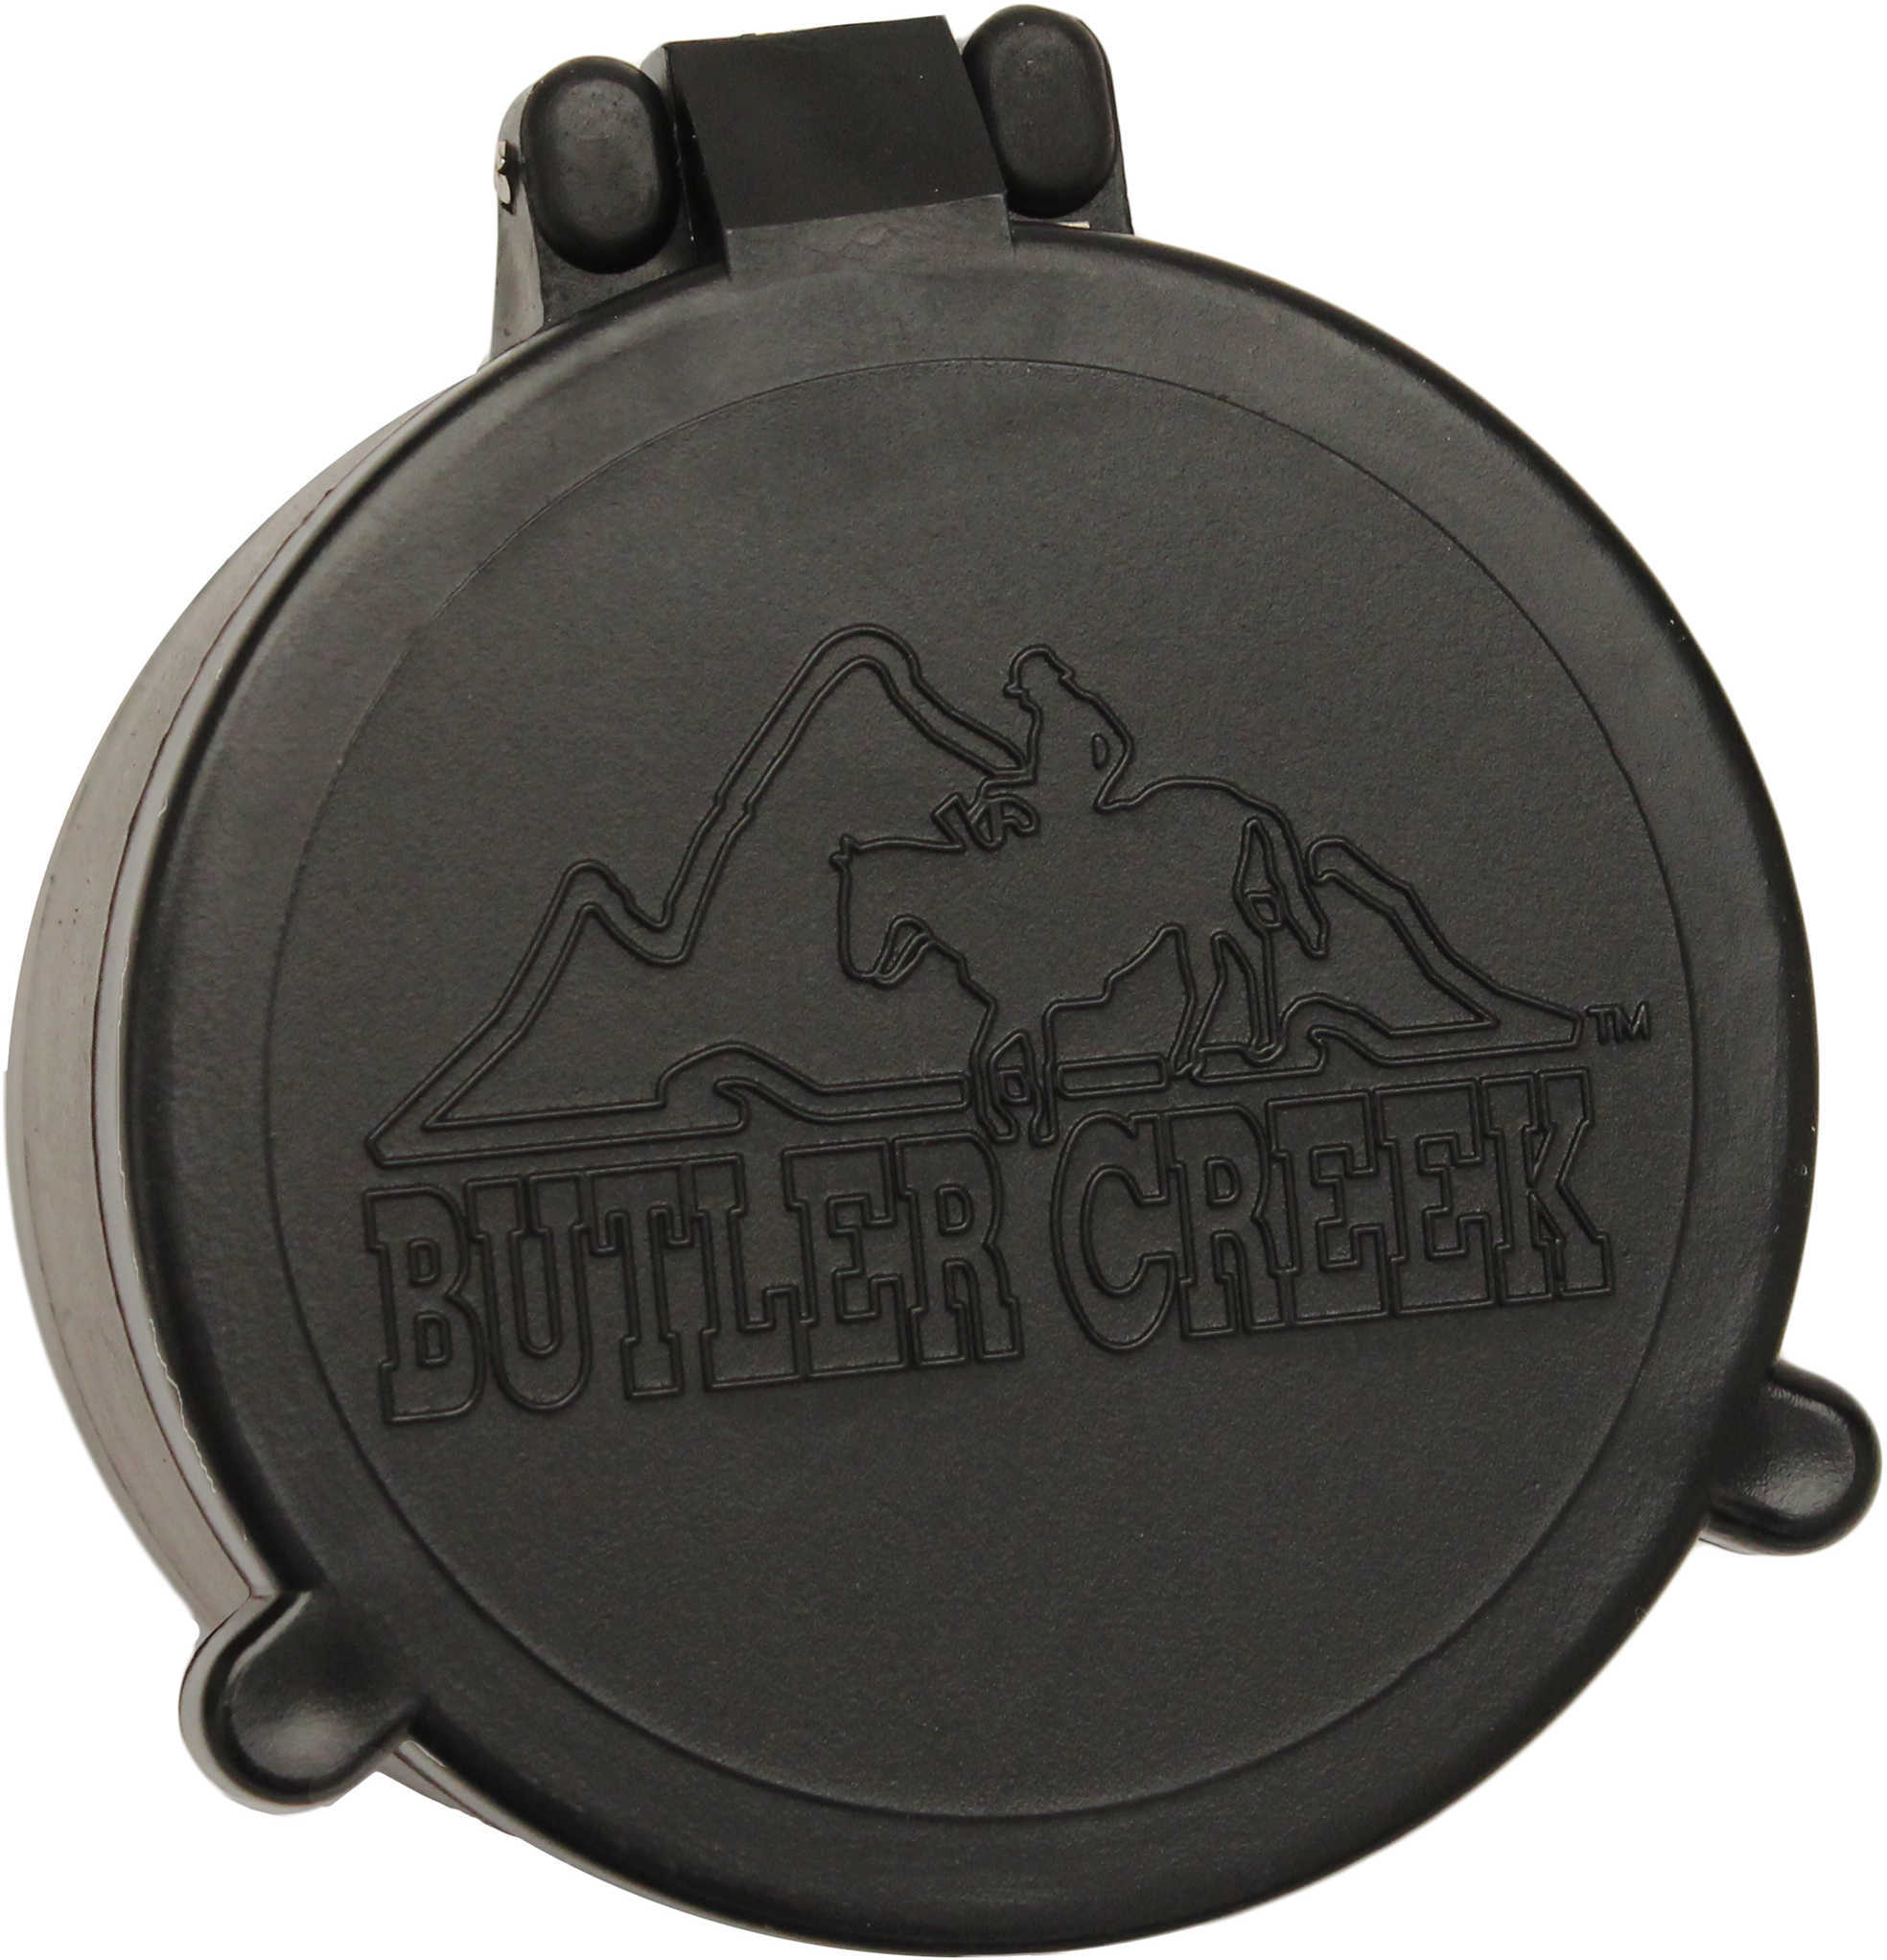 Butler Creek Flip-Open Scope Cover - 30 Objective 1.960" Diameter Quiet Opening lids at The Touch Of Your thum